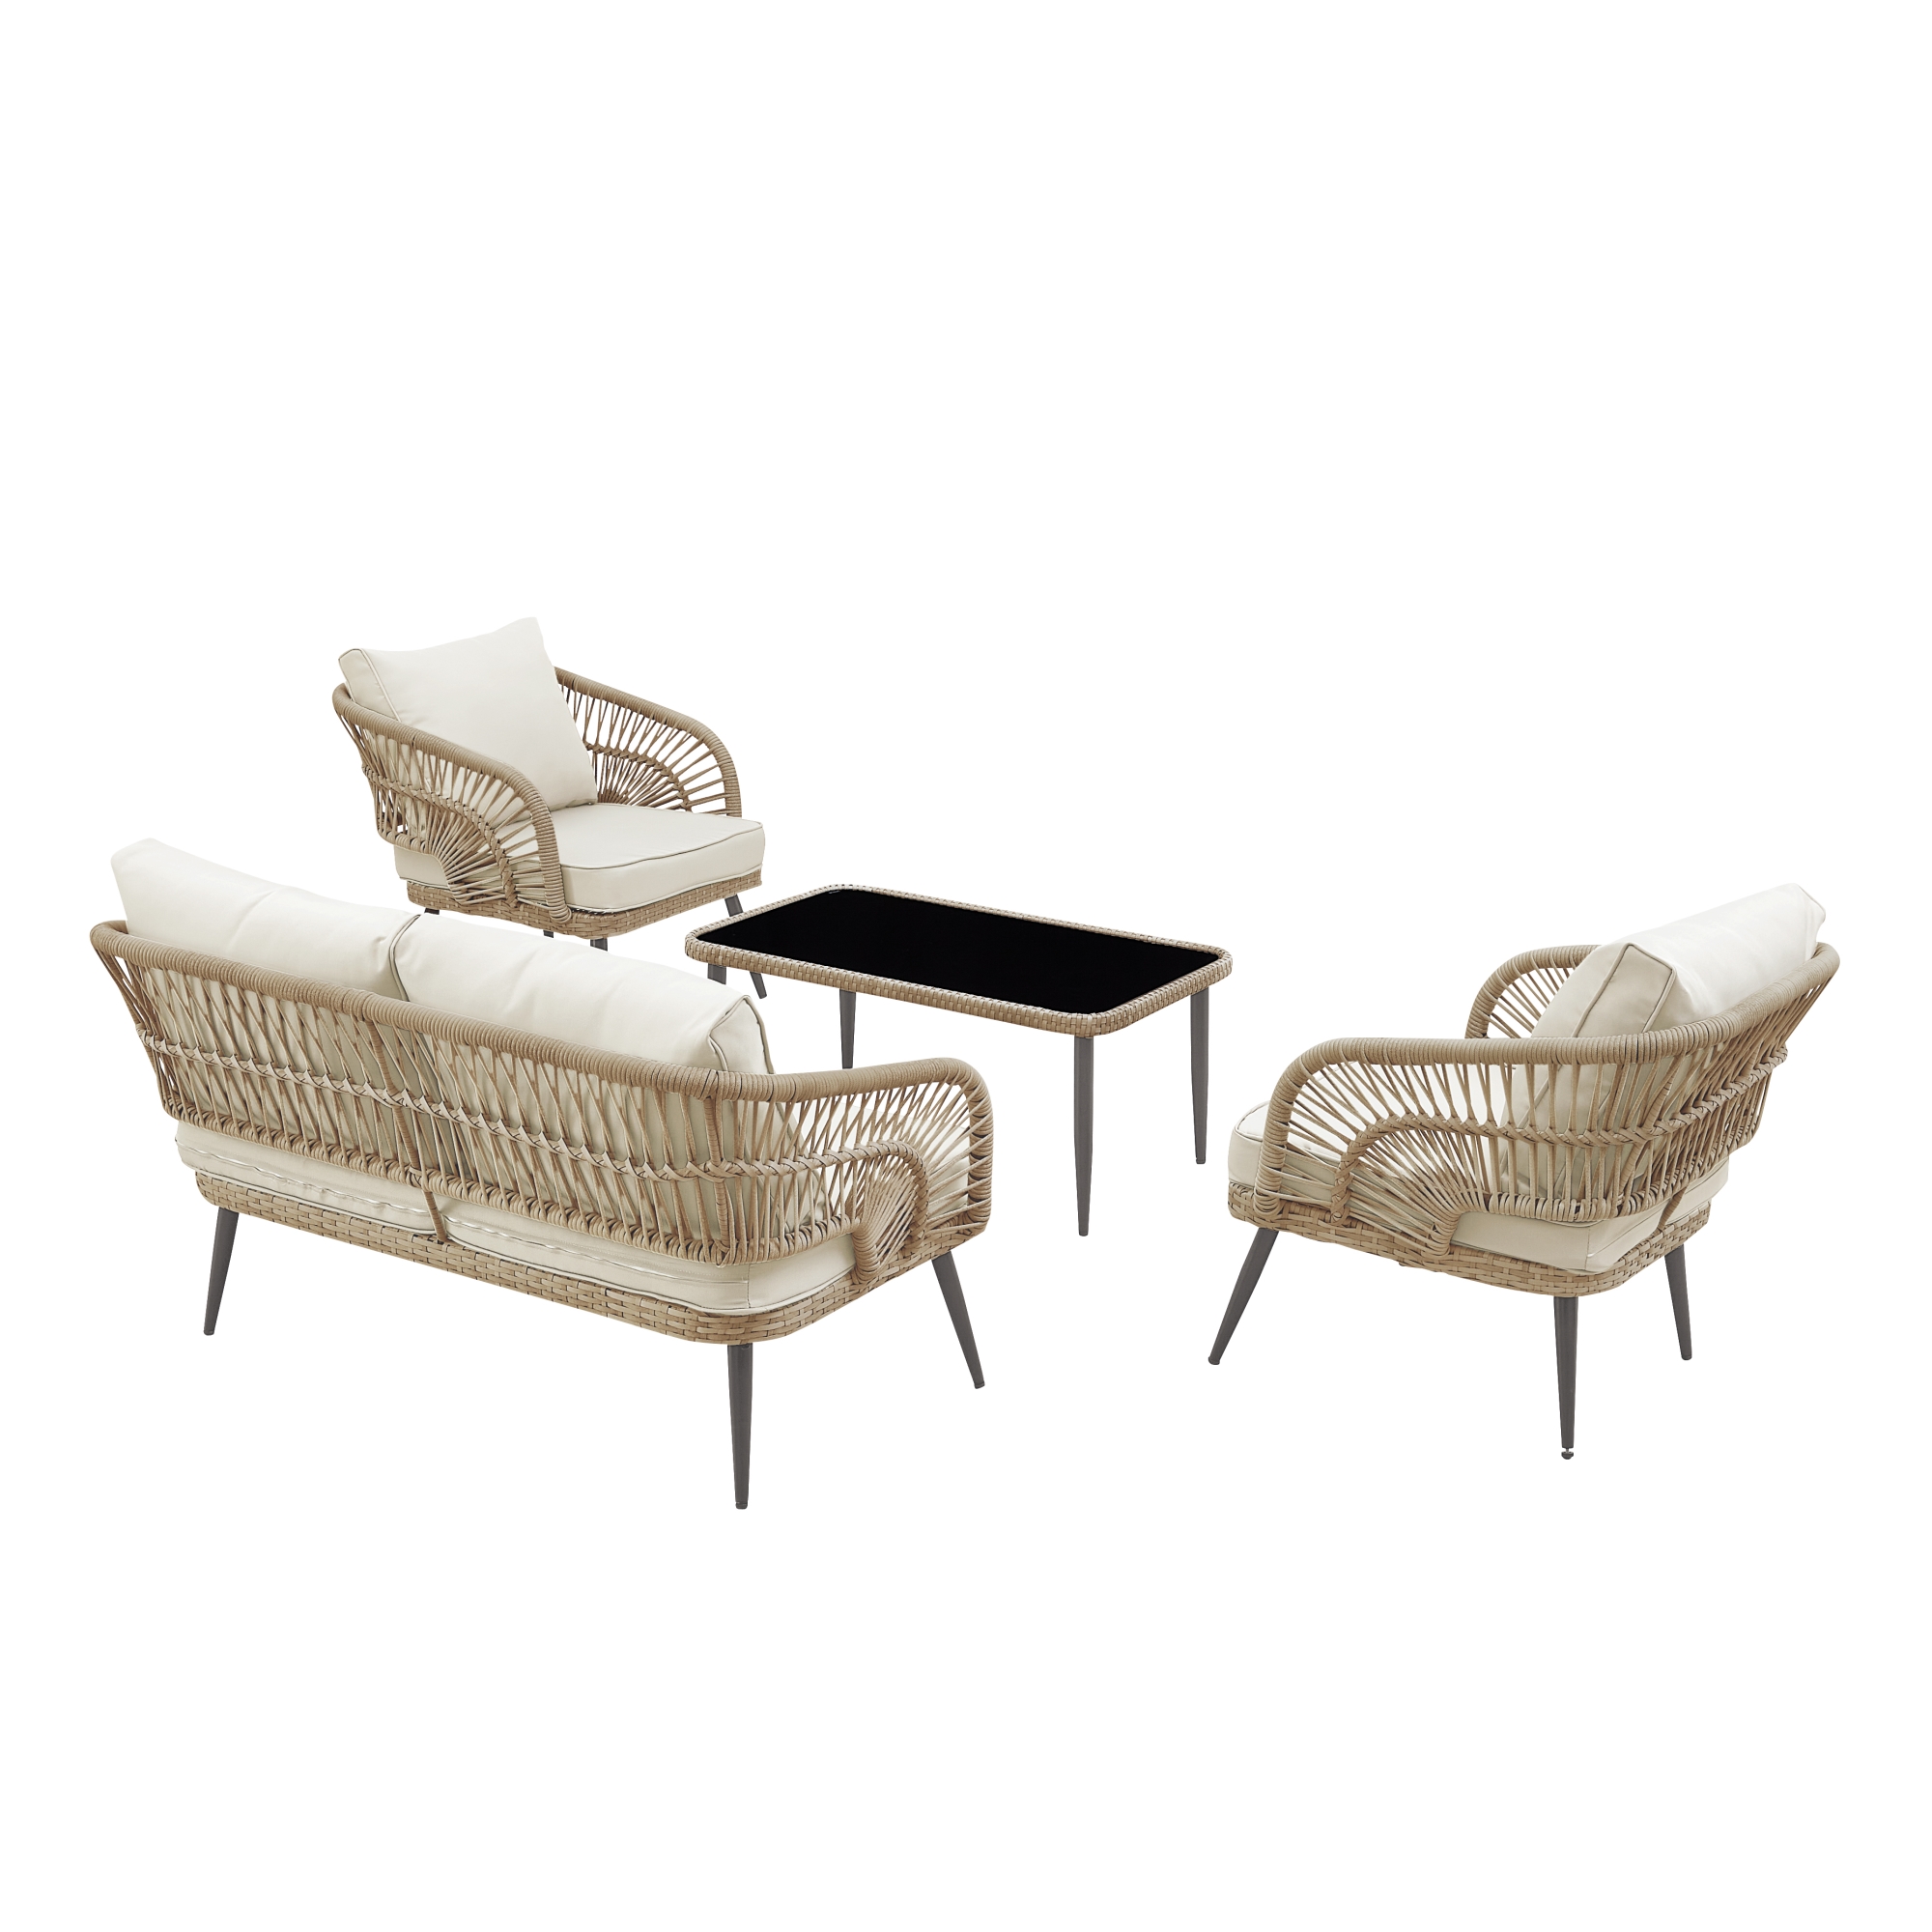 Inspired Home Sylis Outdoor 4pc Seating Group Set: 1 Sofa, 2 Armchairs,1 Coffee Table,Rattan,Washable Cushions,UV Resistant,Teak